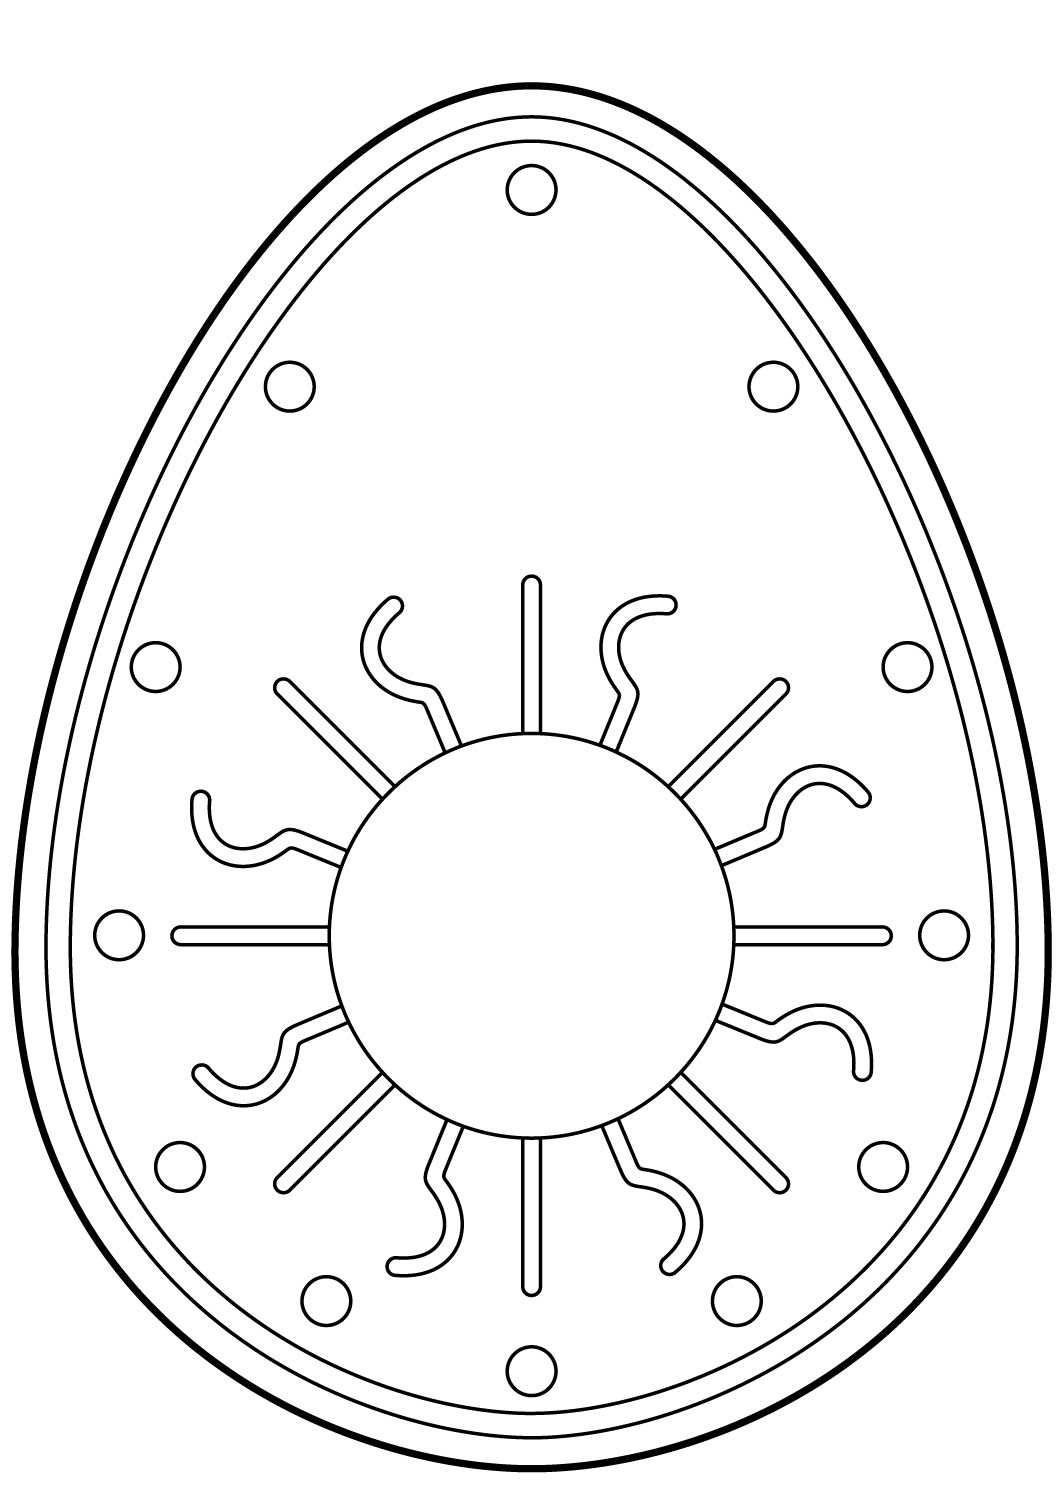 Easter Egg With Decorative Sun Coloring Page